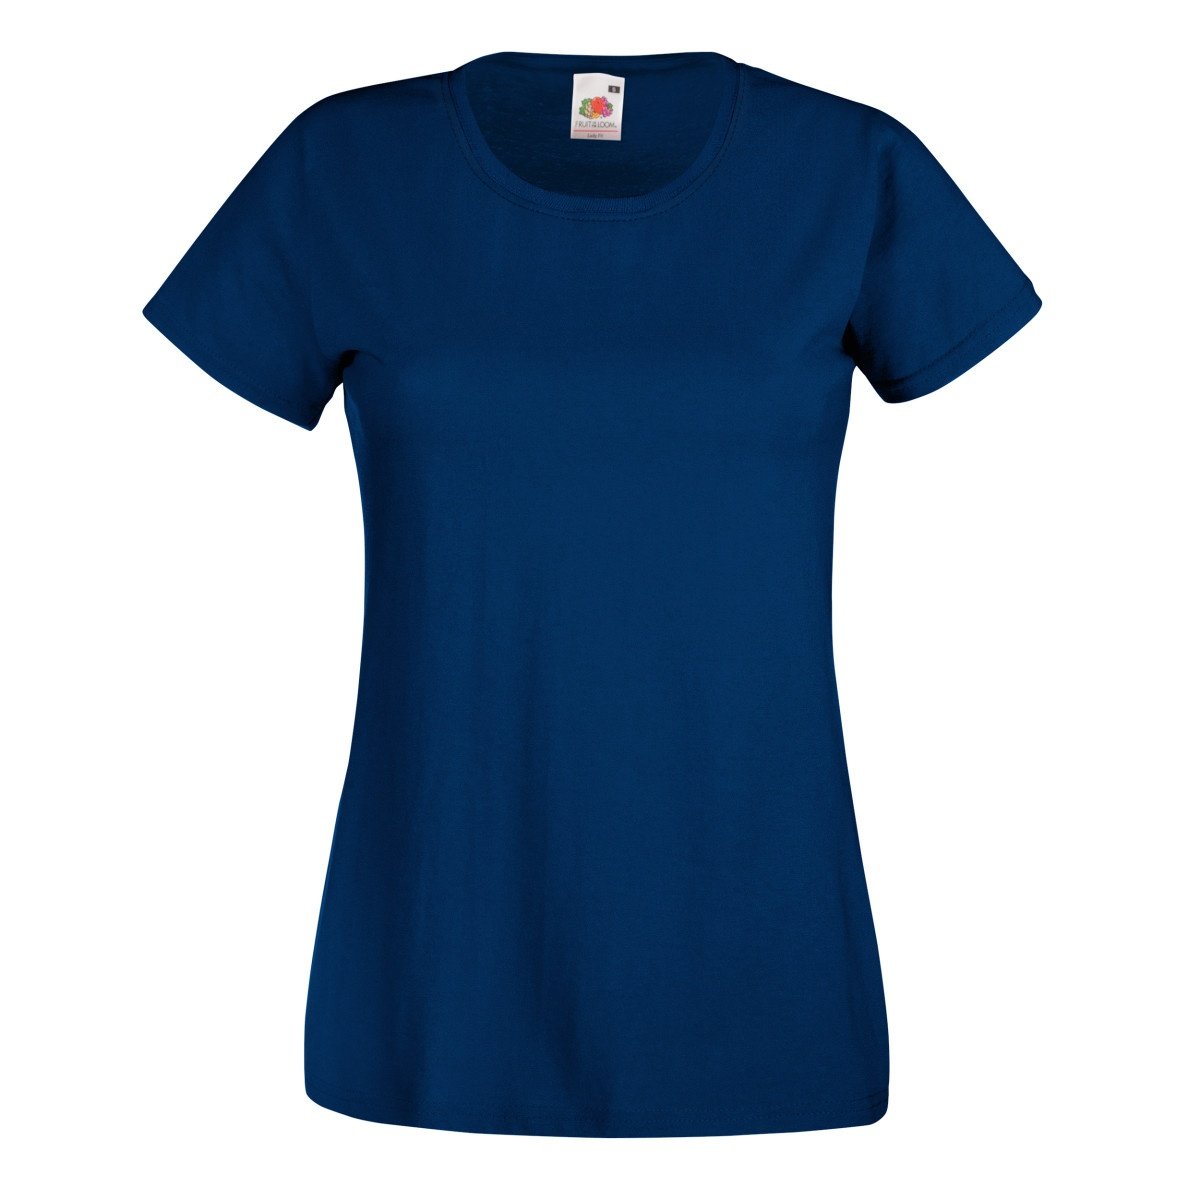 Fruit Of The Loom.. Ladies/Womens Lady-Fit Valueweight Short Sleeve T-Shirt